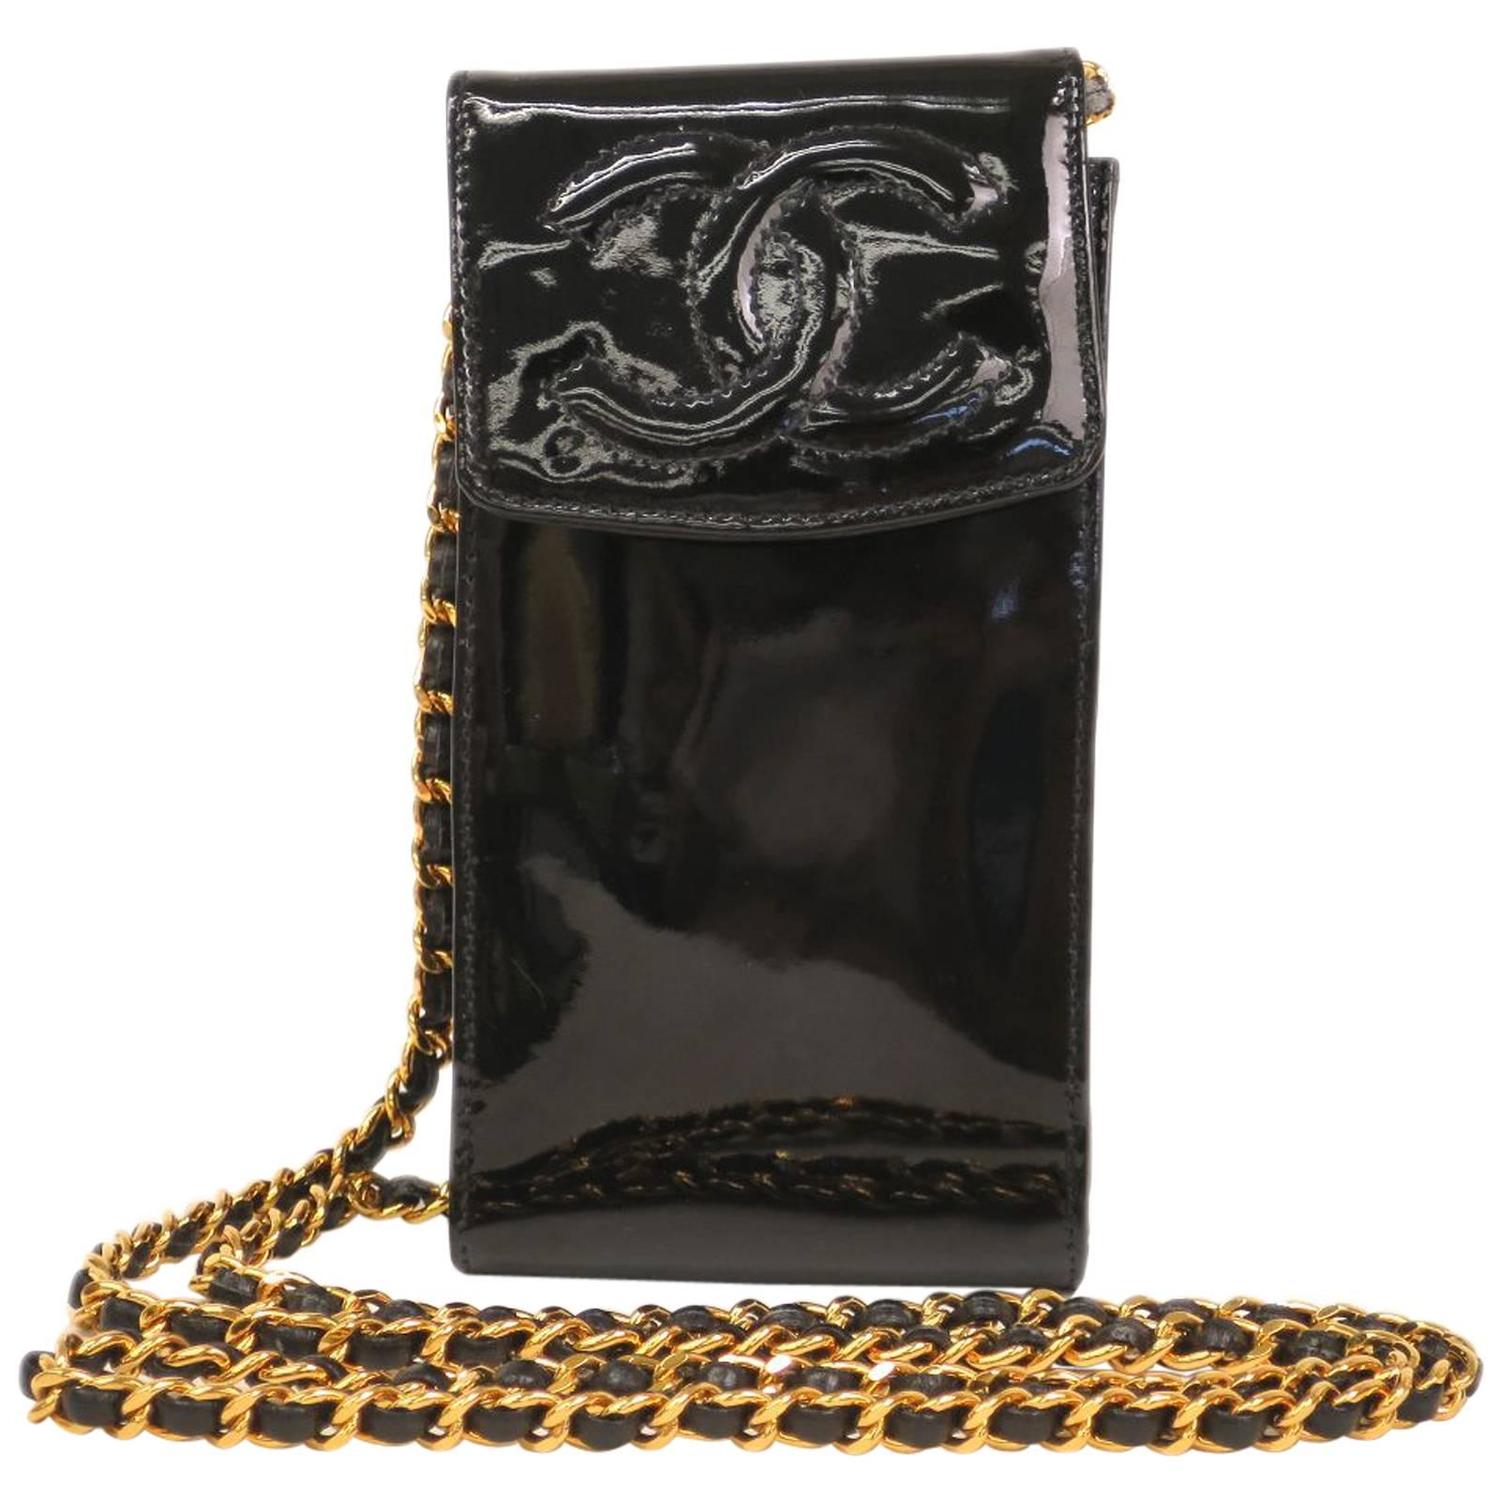 Chanel Black Patent Leather Gold Hardware Mini Cell Phone Crossbody Shoulder Bag at 1stdibs